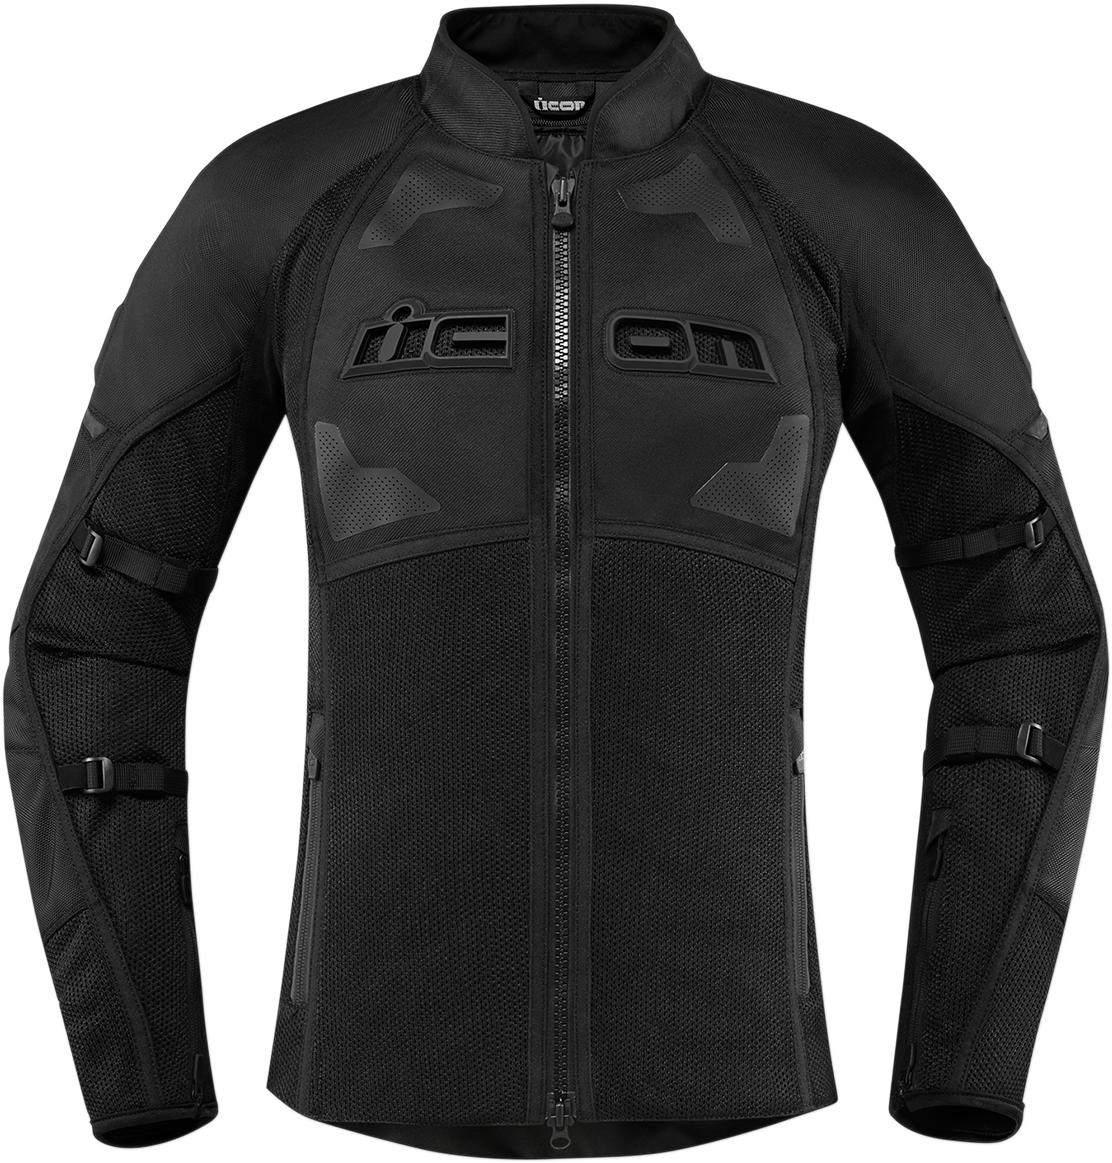 ICON Women's Contra2™ Jacket - Stealth - 2XL 2822-1171